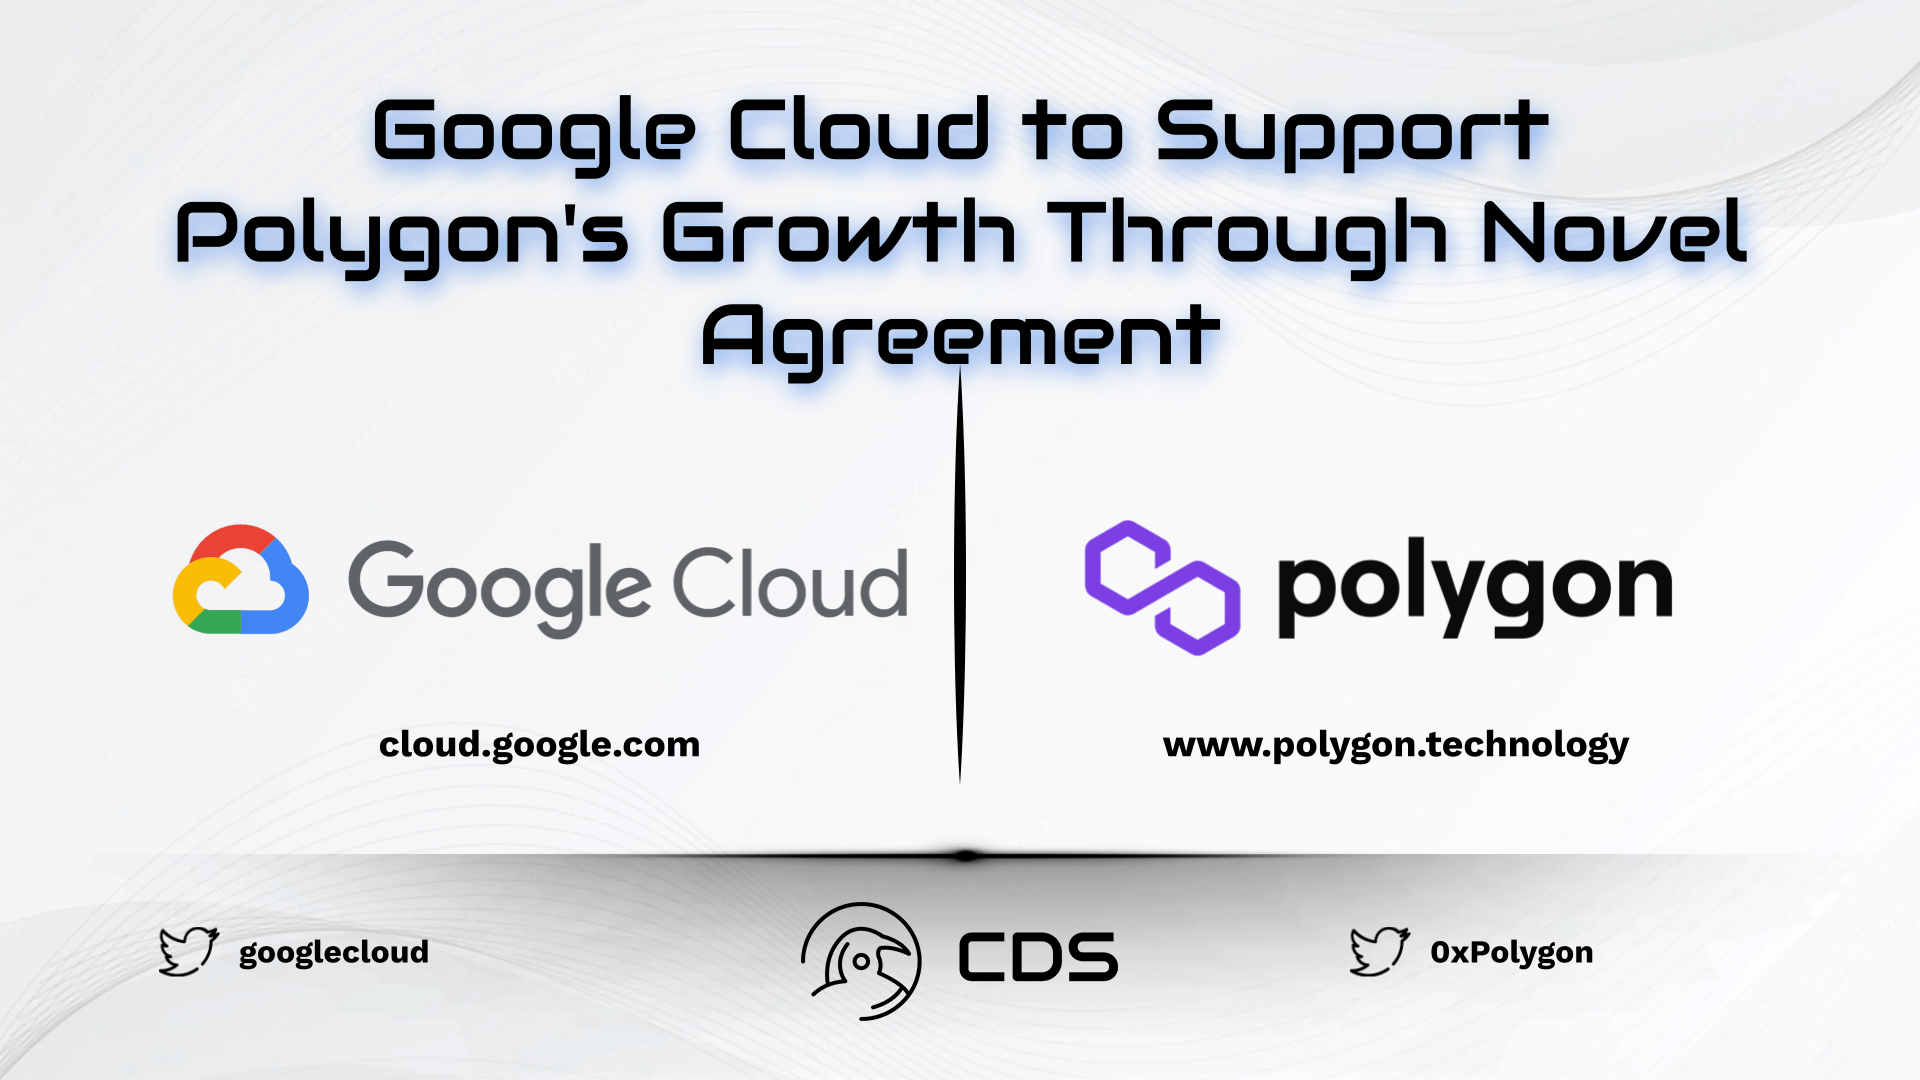 Google Cloud to Support Polygon's Growth Through Novel Agreement